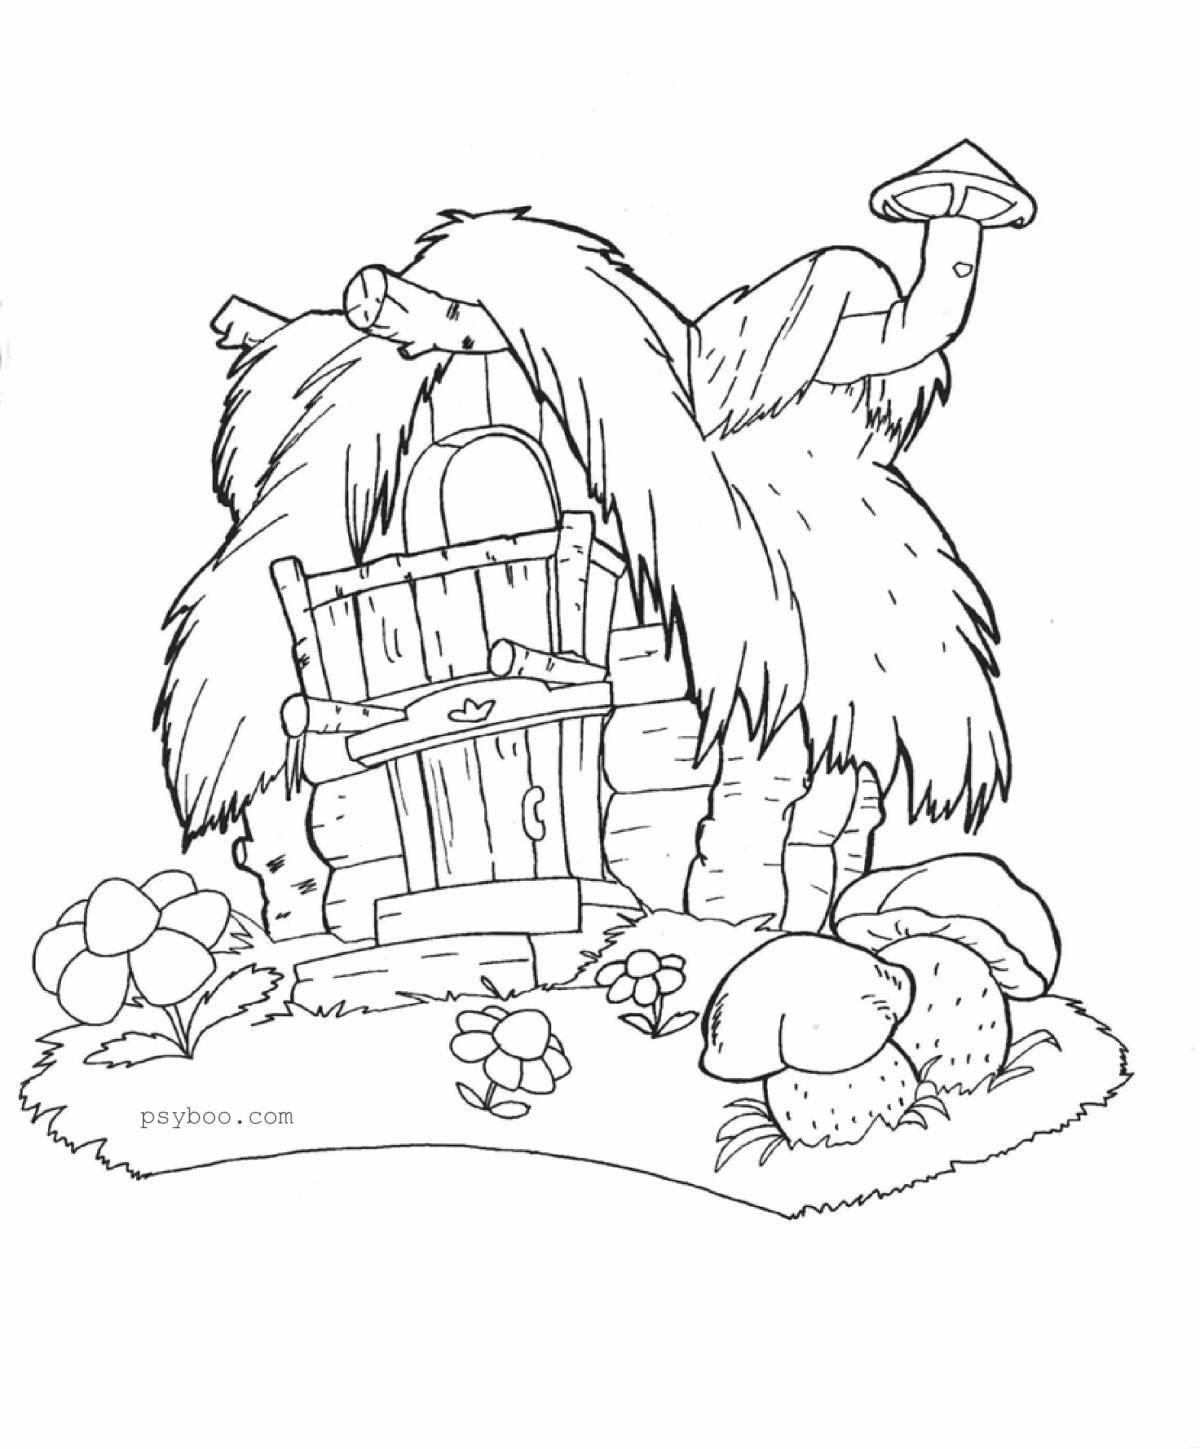 Humorous hut coloring for children